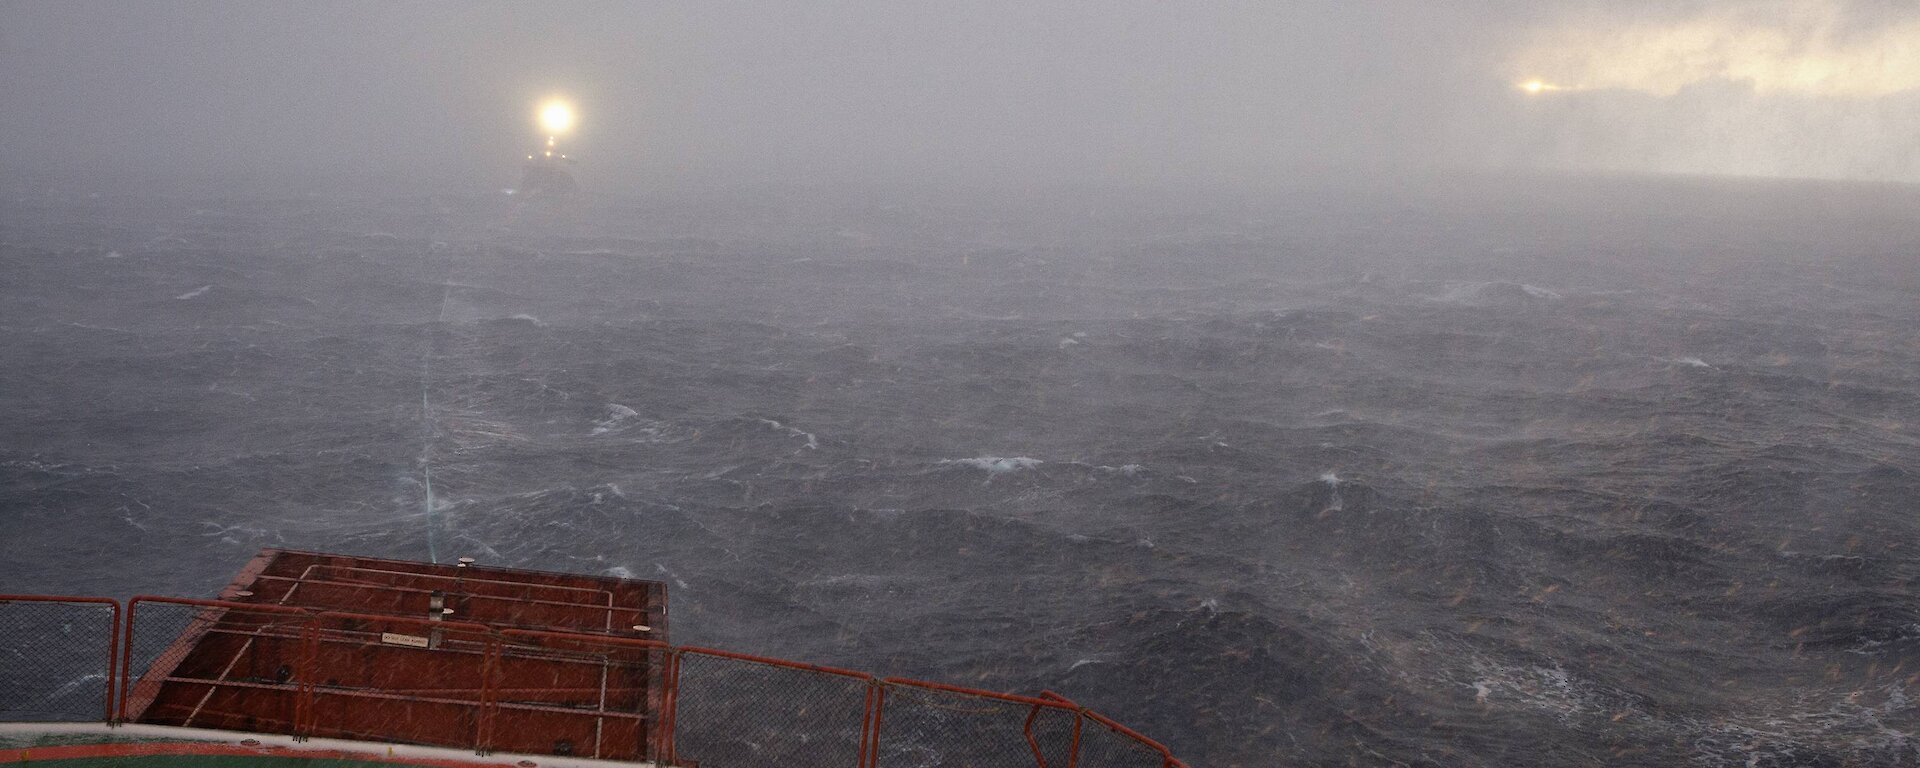 Snow storm obscures the F.V. Janas off the stern of the Aurora Australis